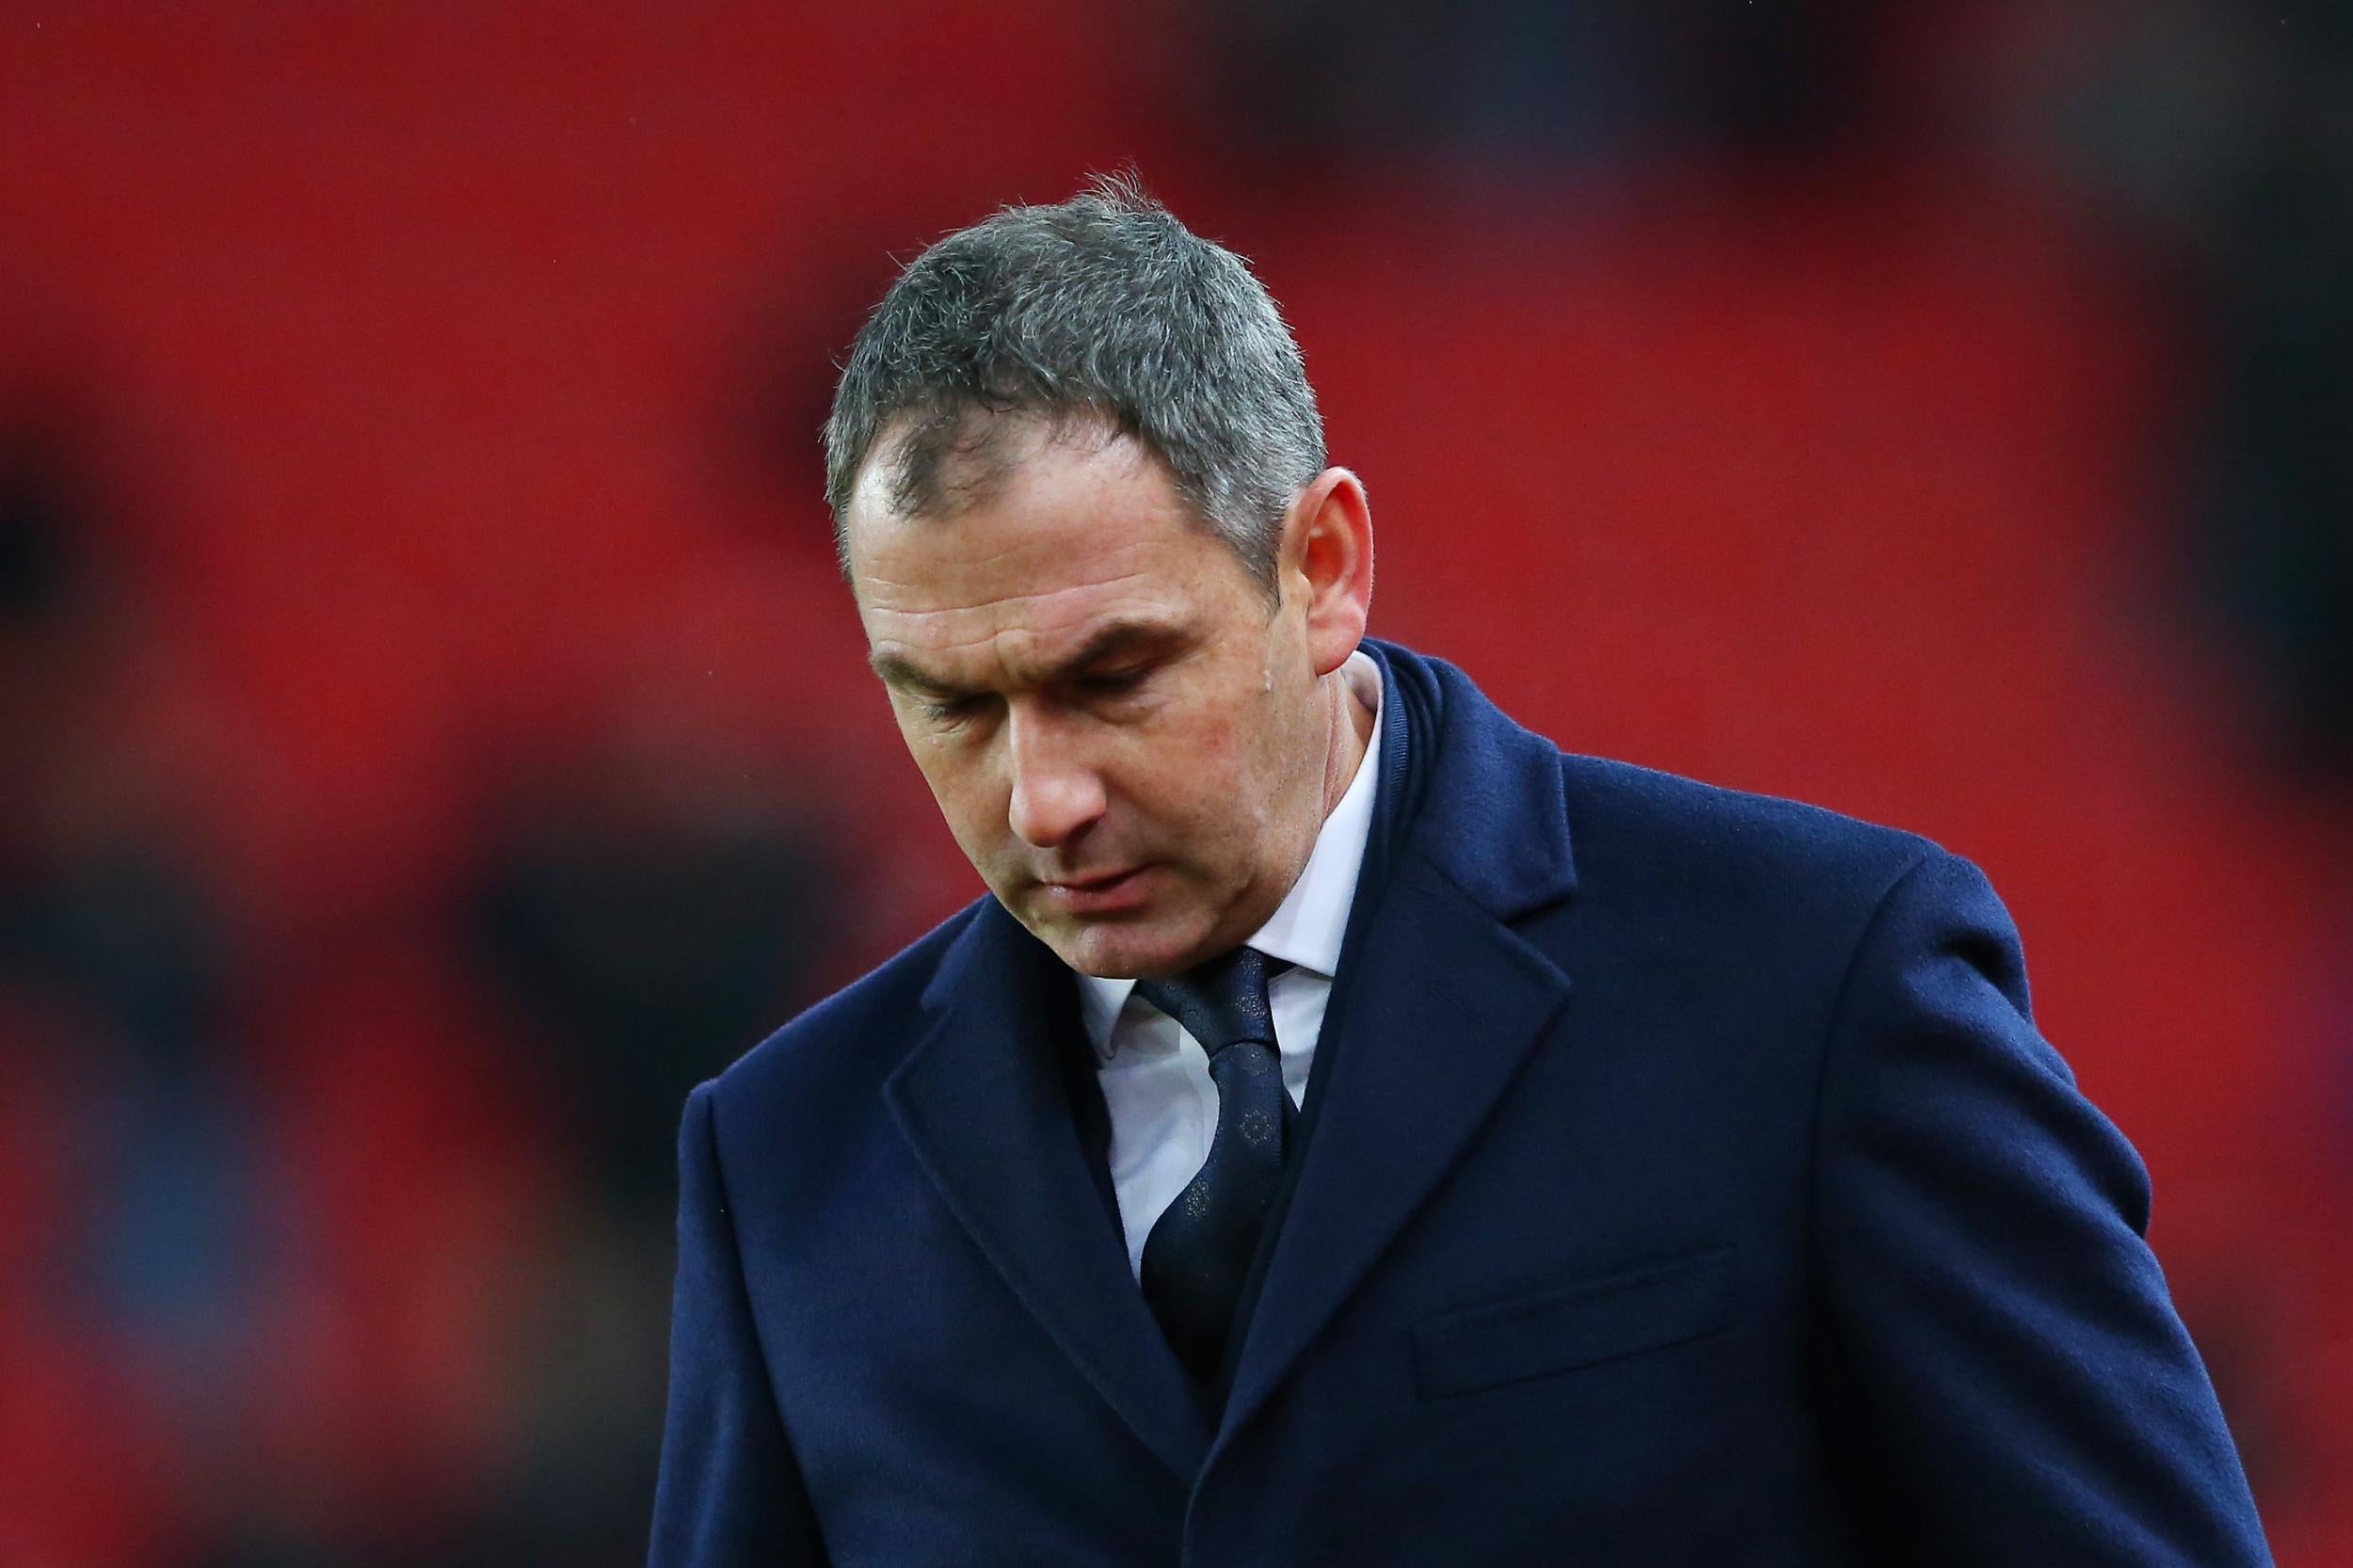 Paul Clement was sacked by Swansea City after less than a year in charge